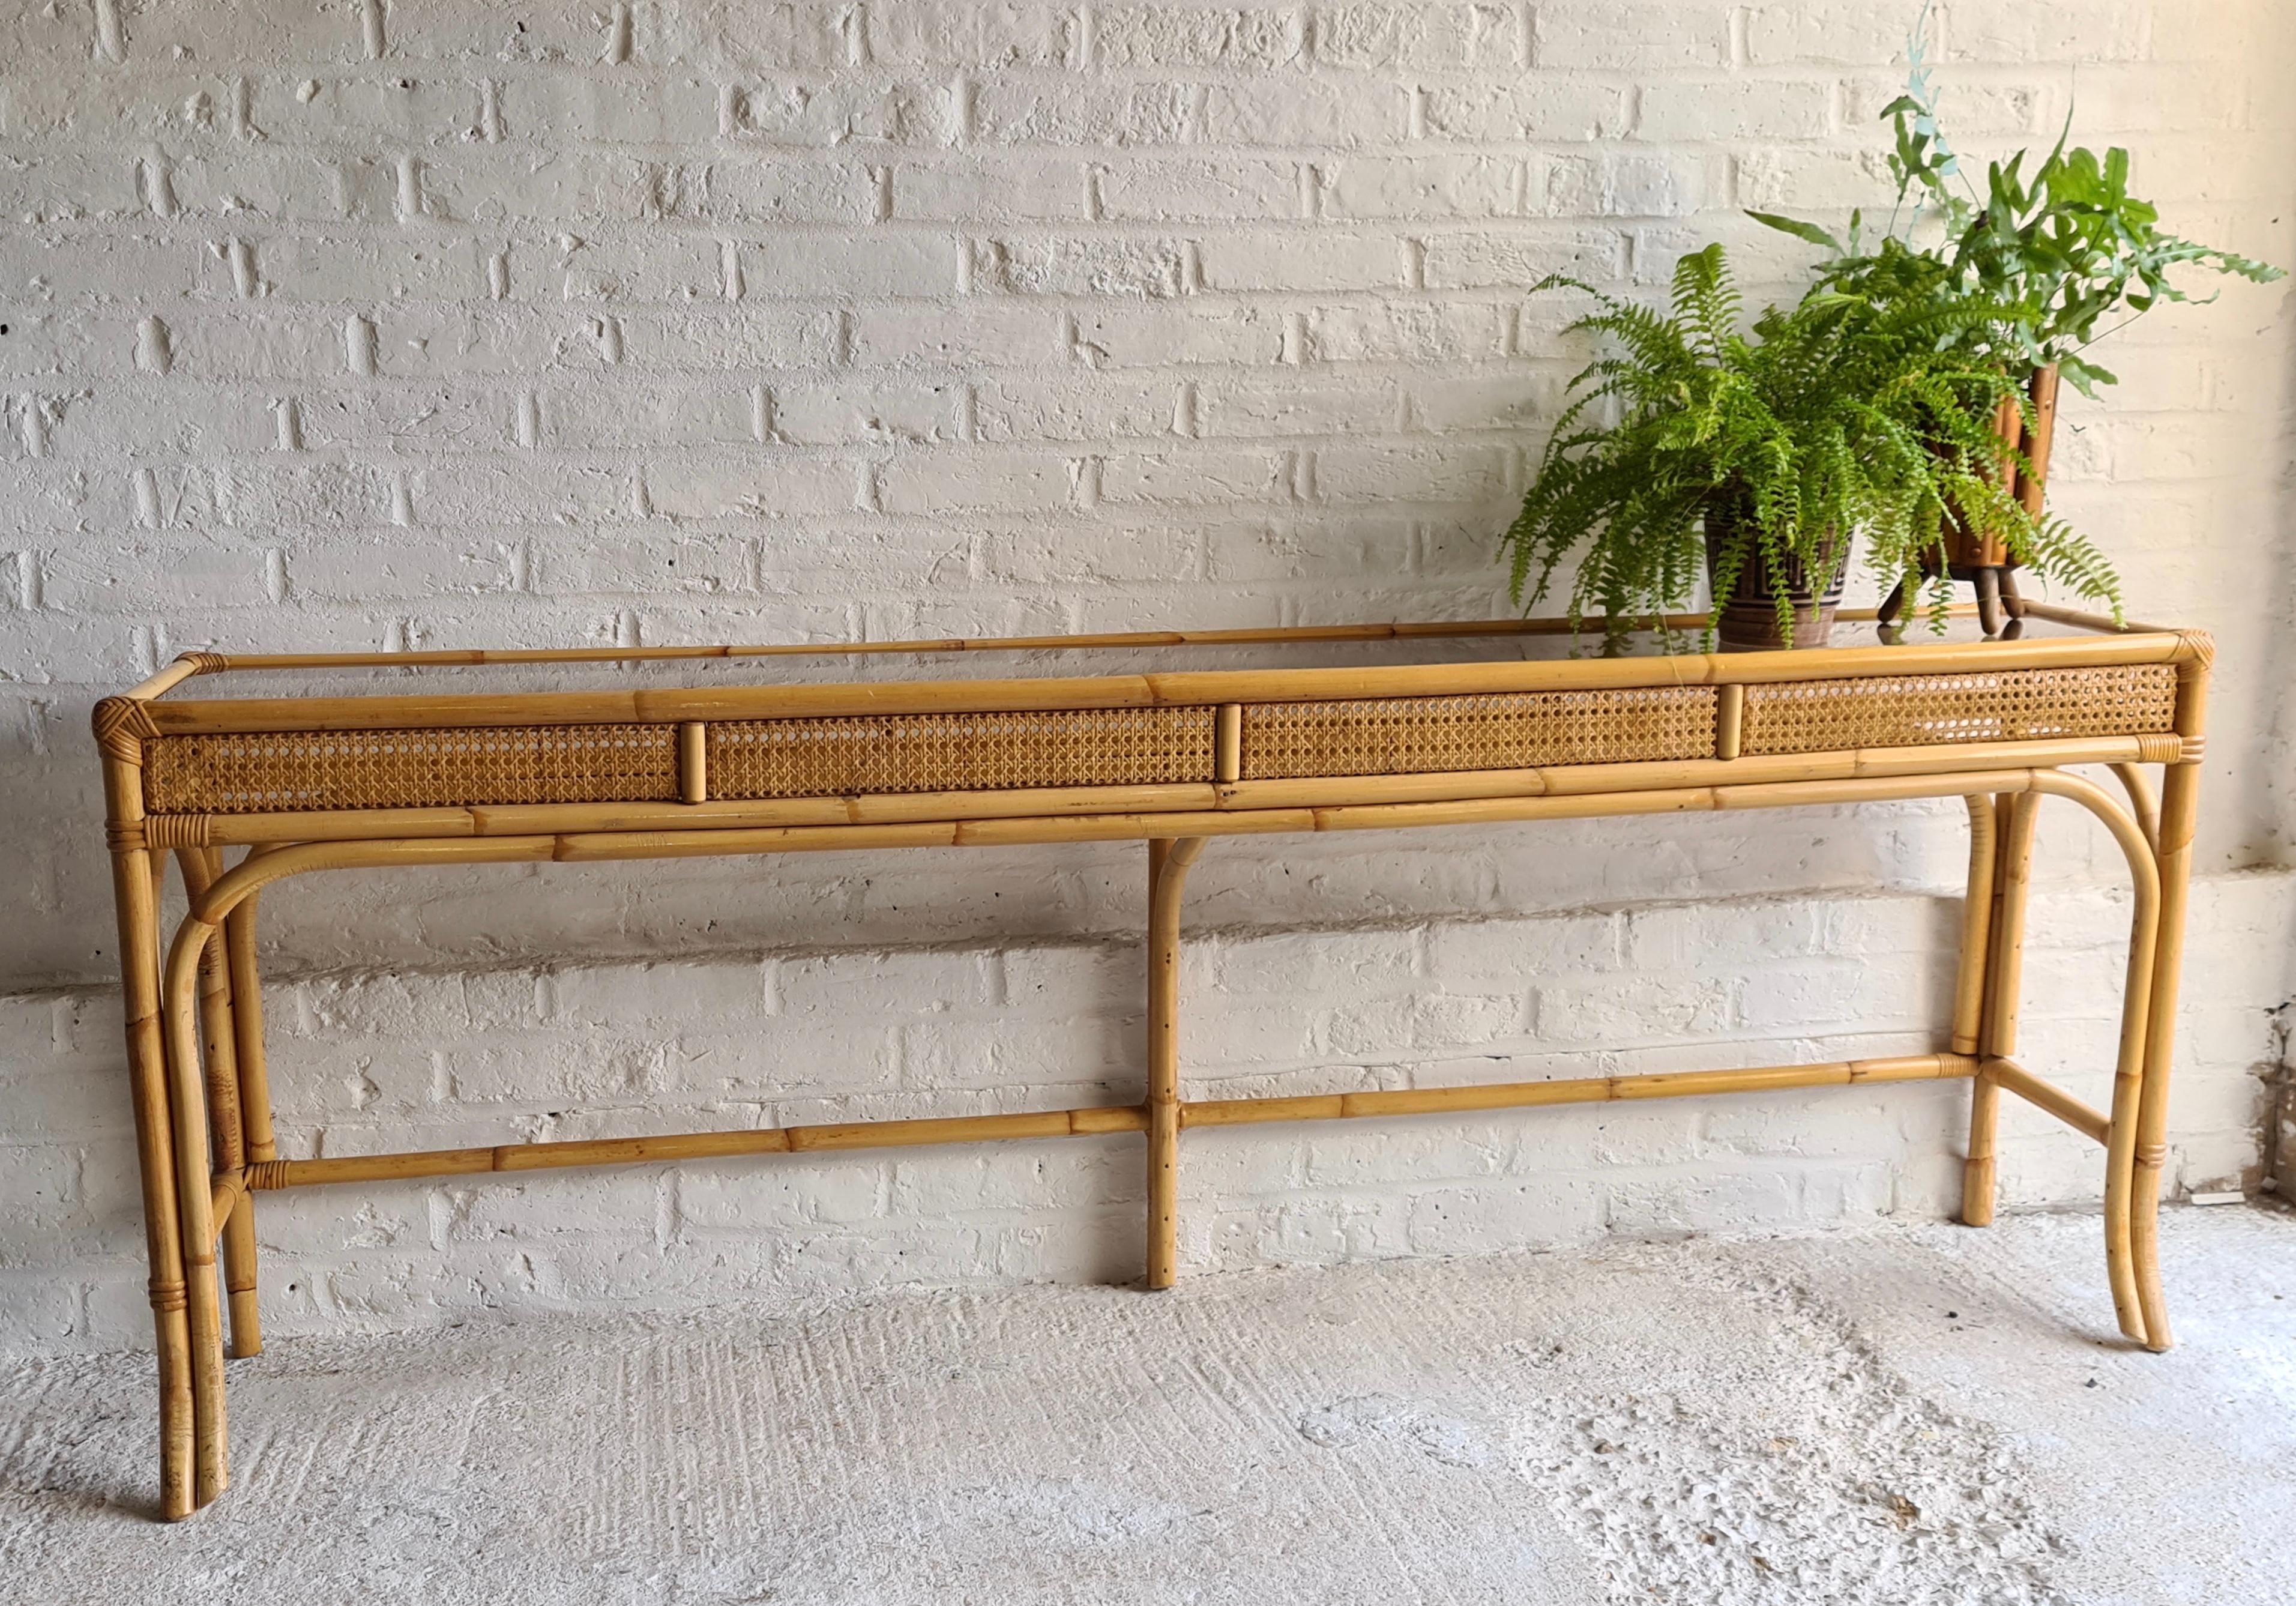 Midcentury rattan and glass top console table, Italian, 1970s

2 meter long midcentury rattan and glass top console table, Italian, 1970s

This extra long rattan console table, with 5mm smoked glass top, and cane weave matting
panels below, is